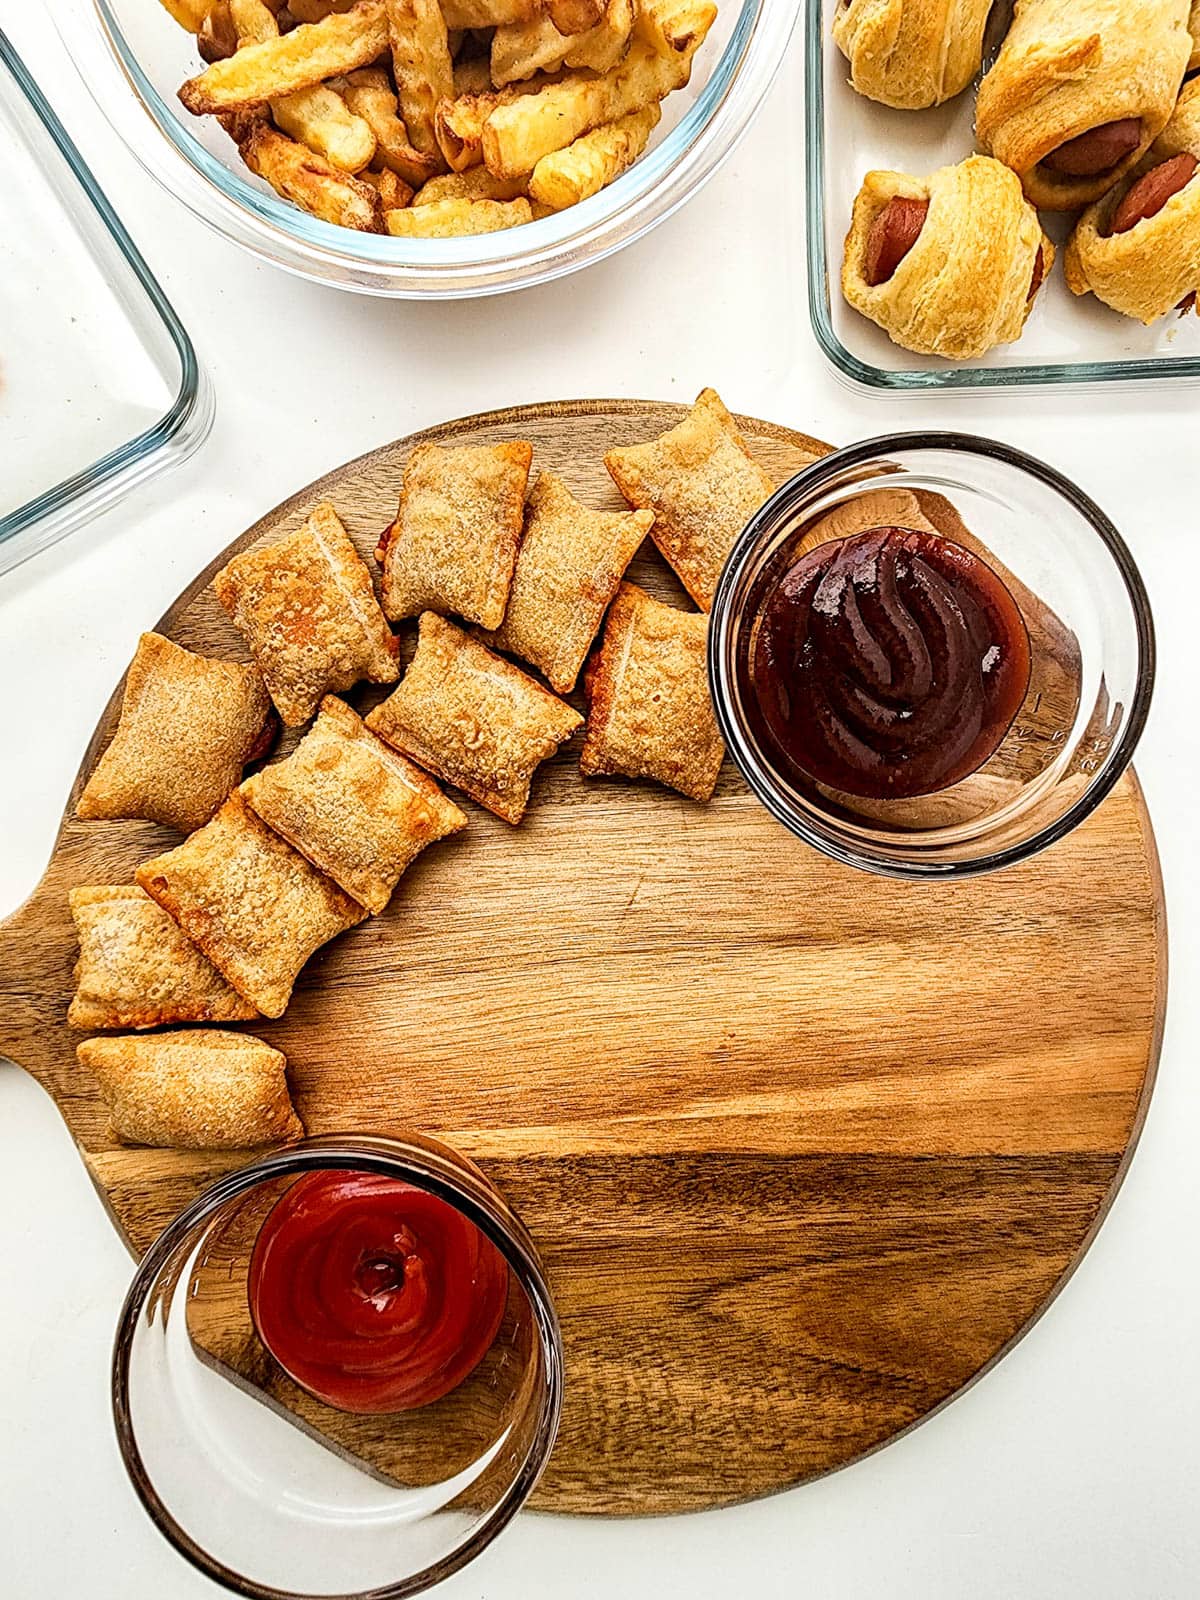 Pizza rolls with dipping sauces on wooden board